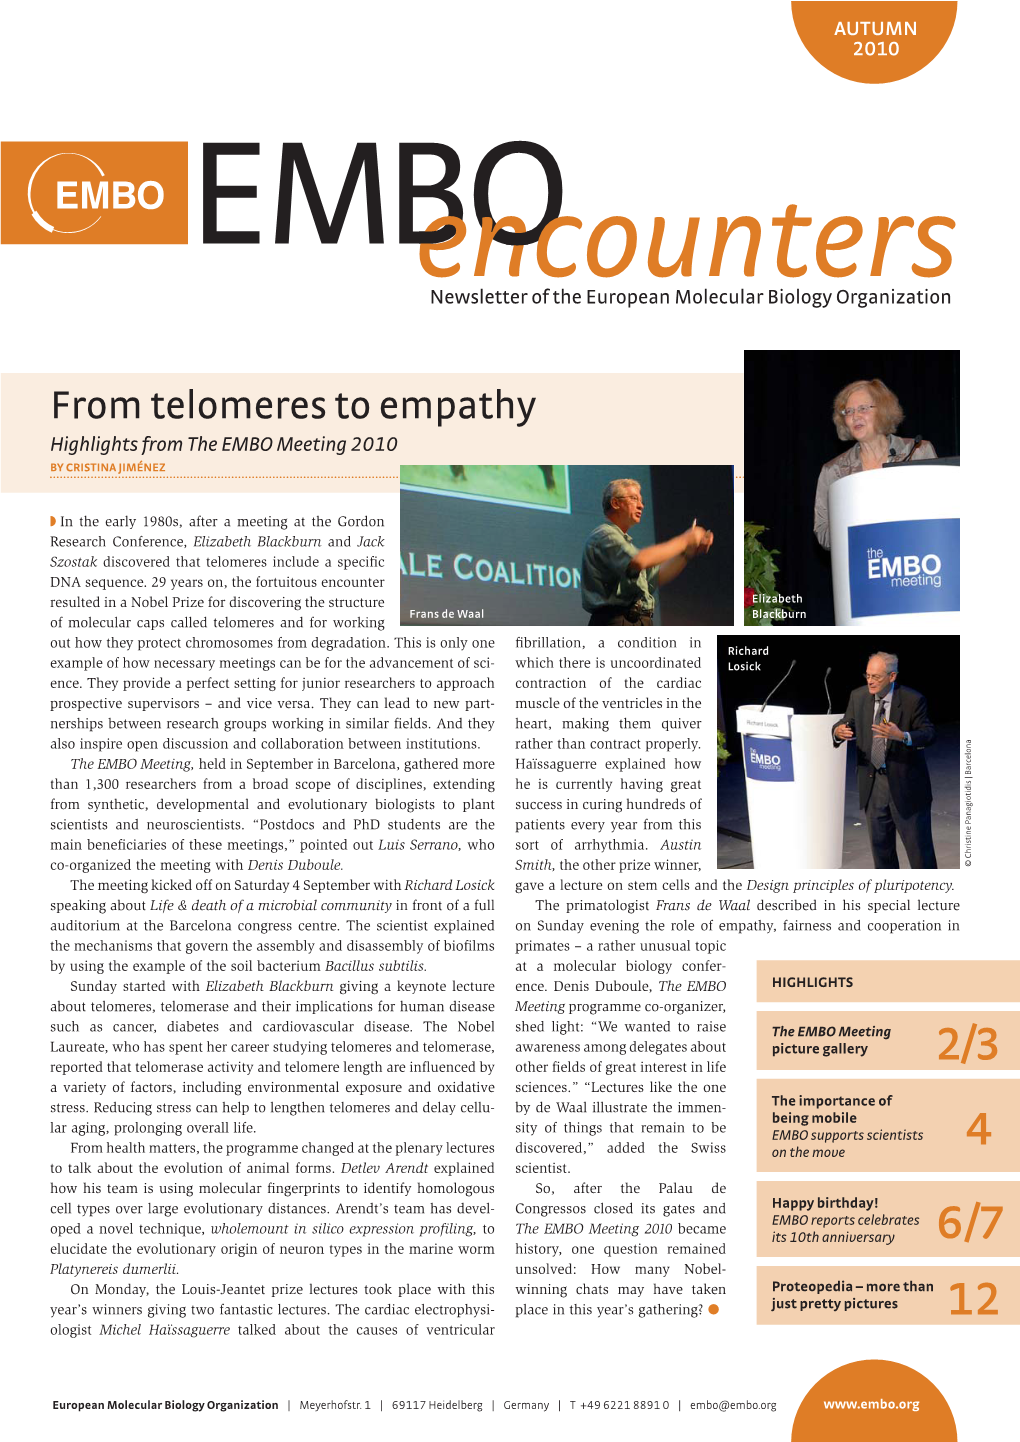 From Telomeres to Empathy Highlights from the EMBO Meeting 2010 by CRISTINA JIMÉNEZ